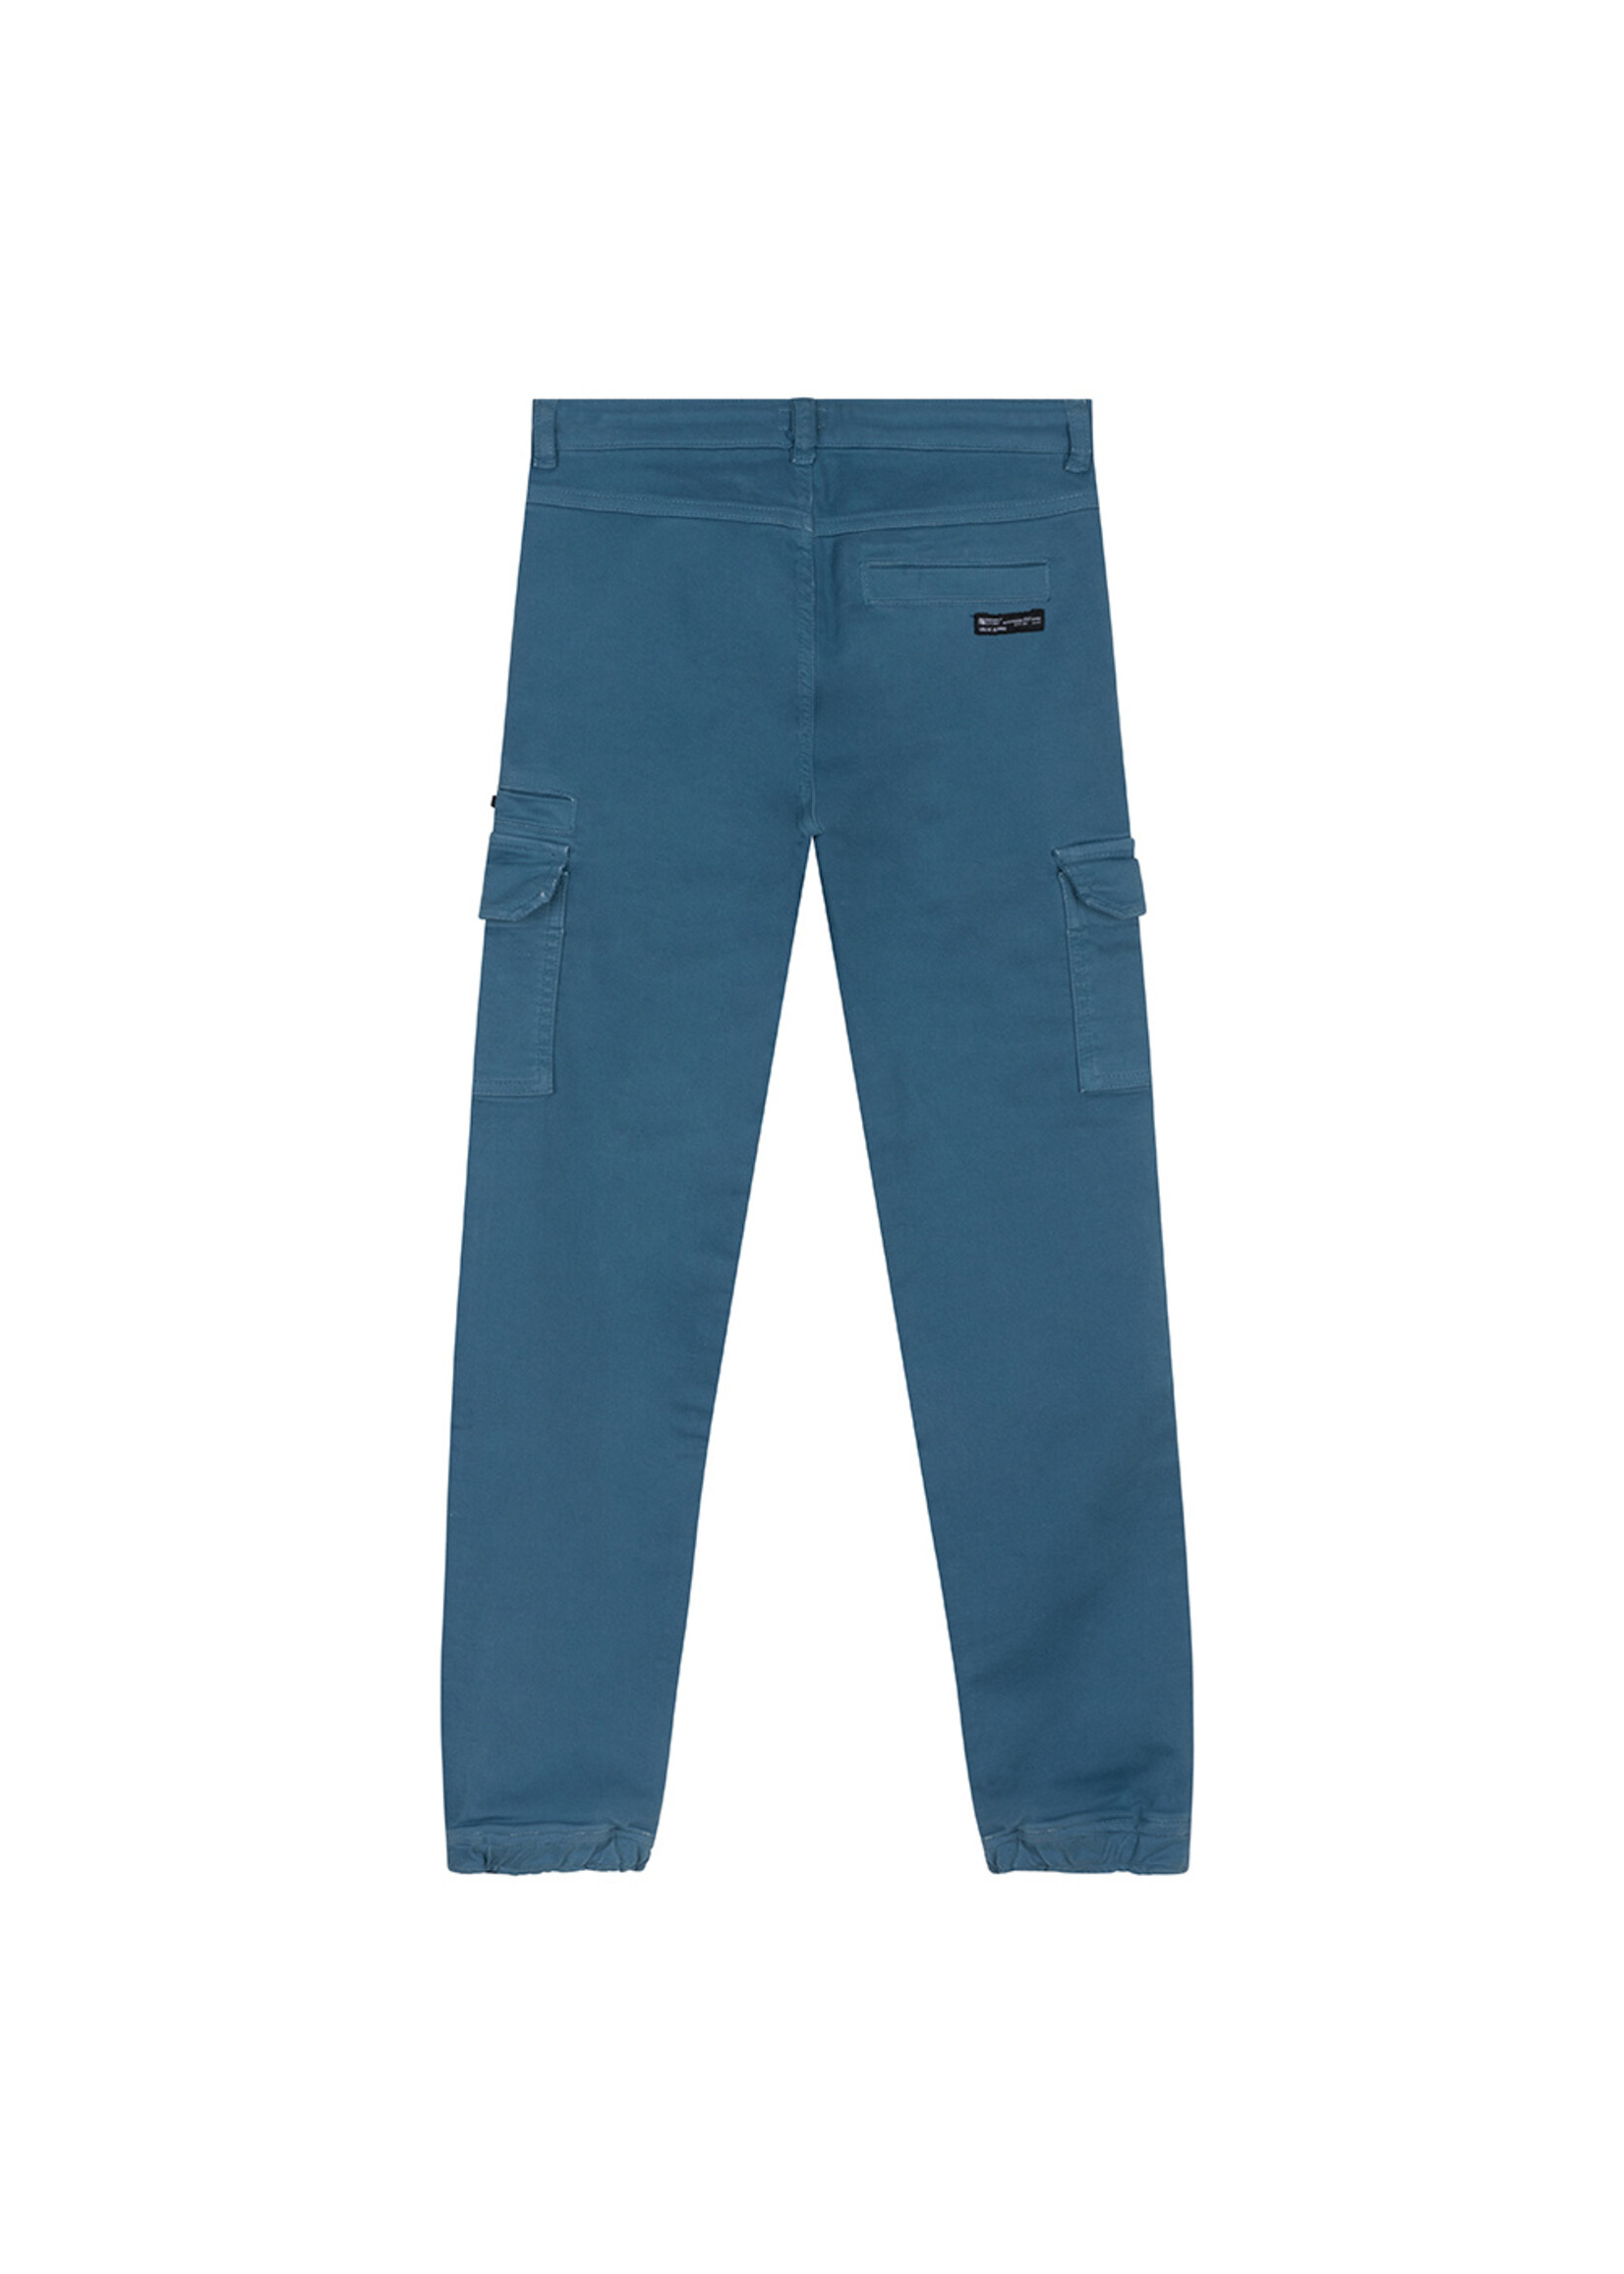 Indian Blue Jeans Cargo Pant Steel Blue